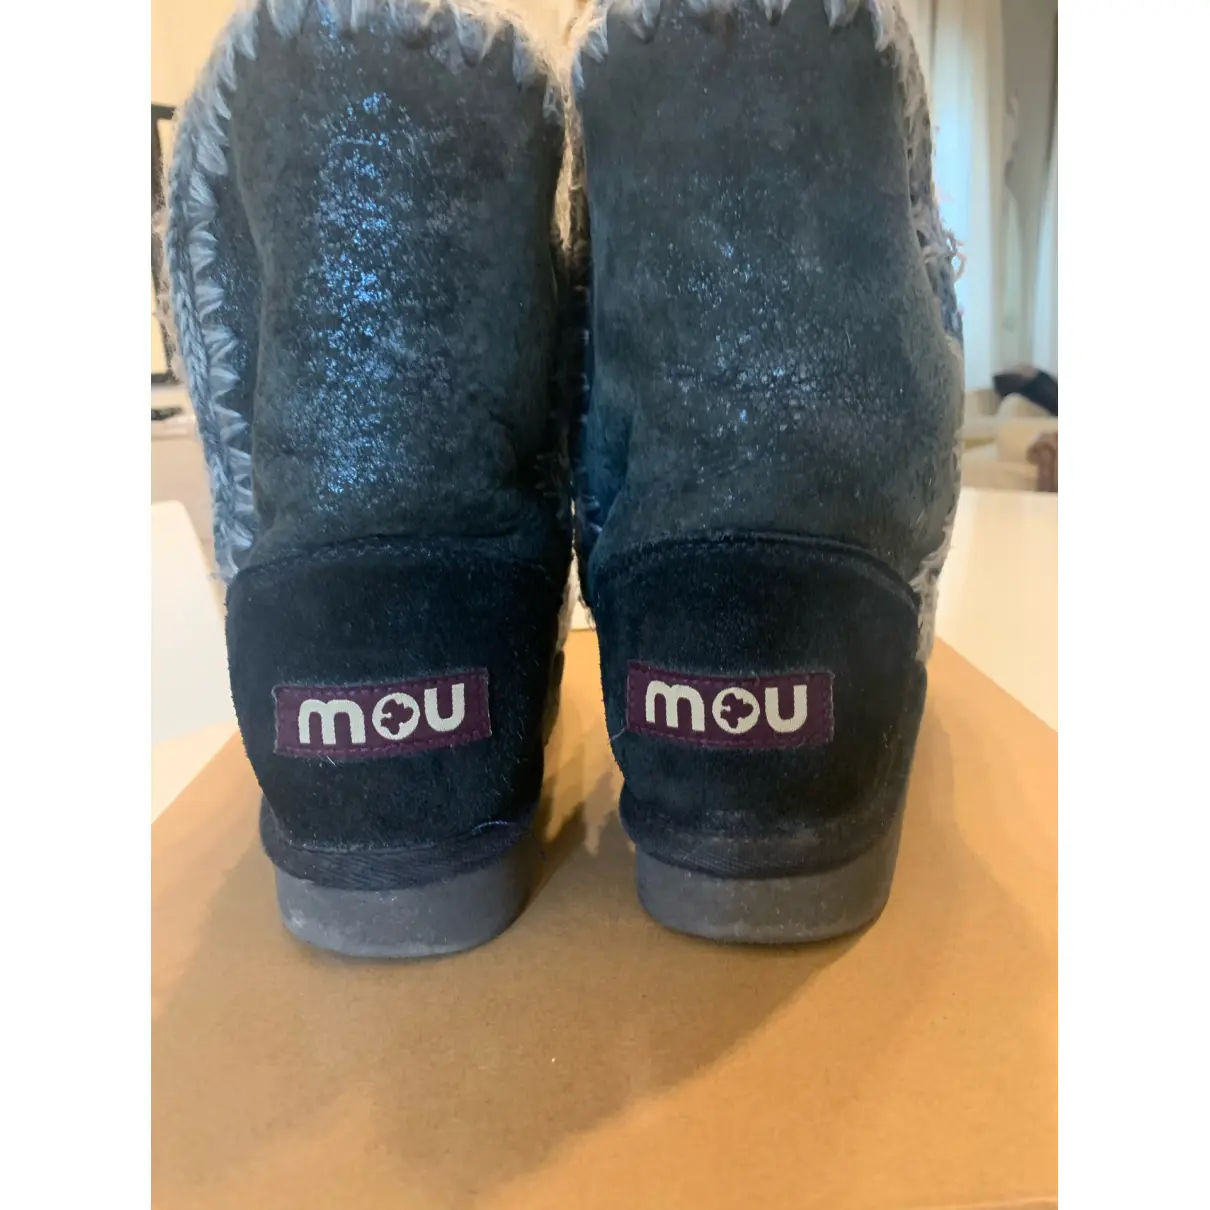 Buy Mou Boots online